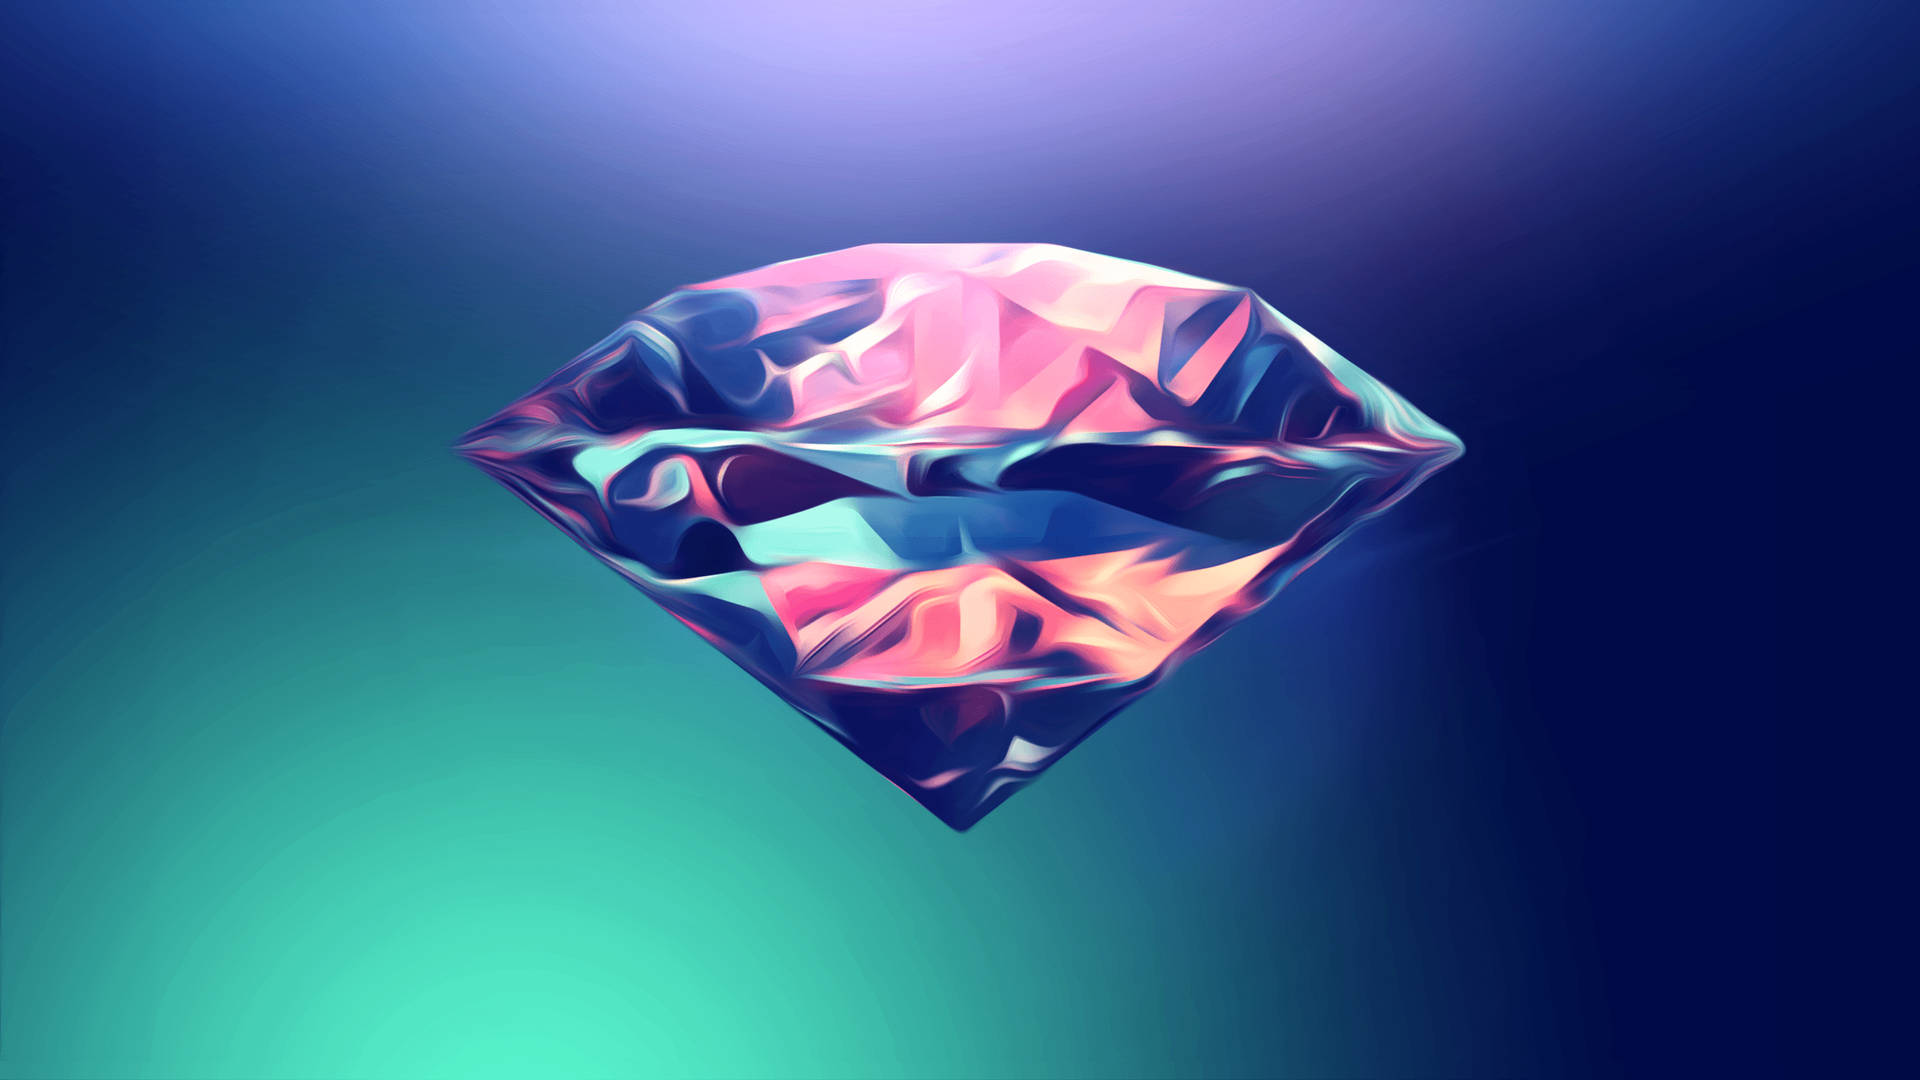 Pink Diamond Supply Co Wallpapers